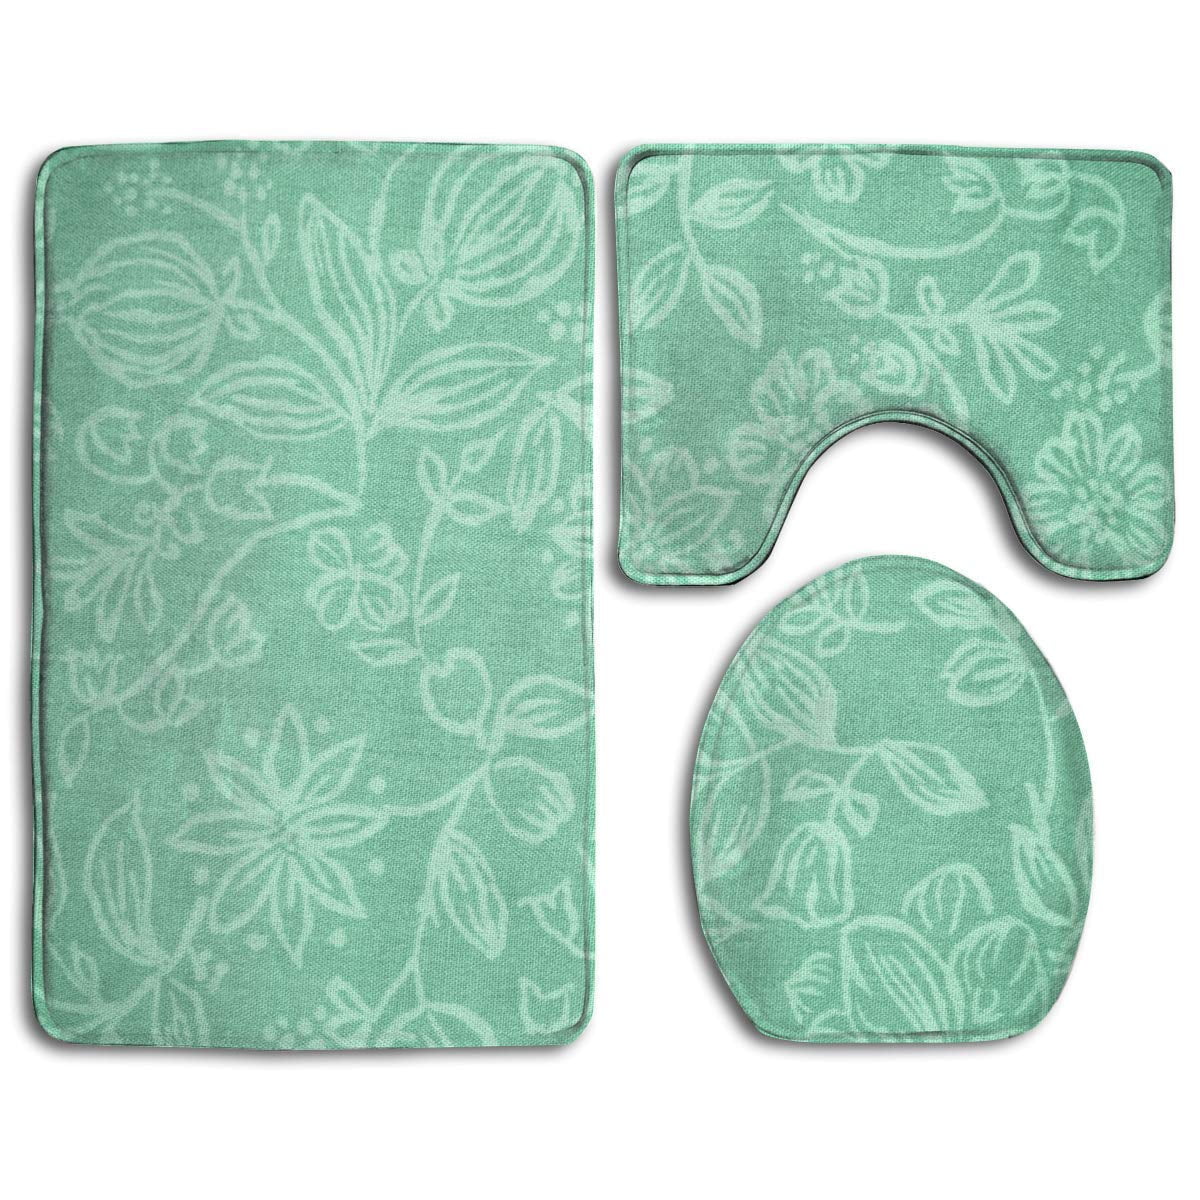 Gohao Mint Green Flowers 3 Piece Bathroom Rugs Set Bath Rug Contour Mat And Toilet Lid Cover, Green And Brown Bathroom Rugs